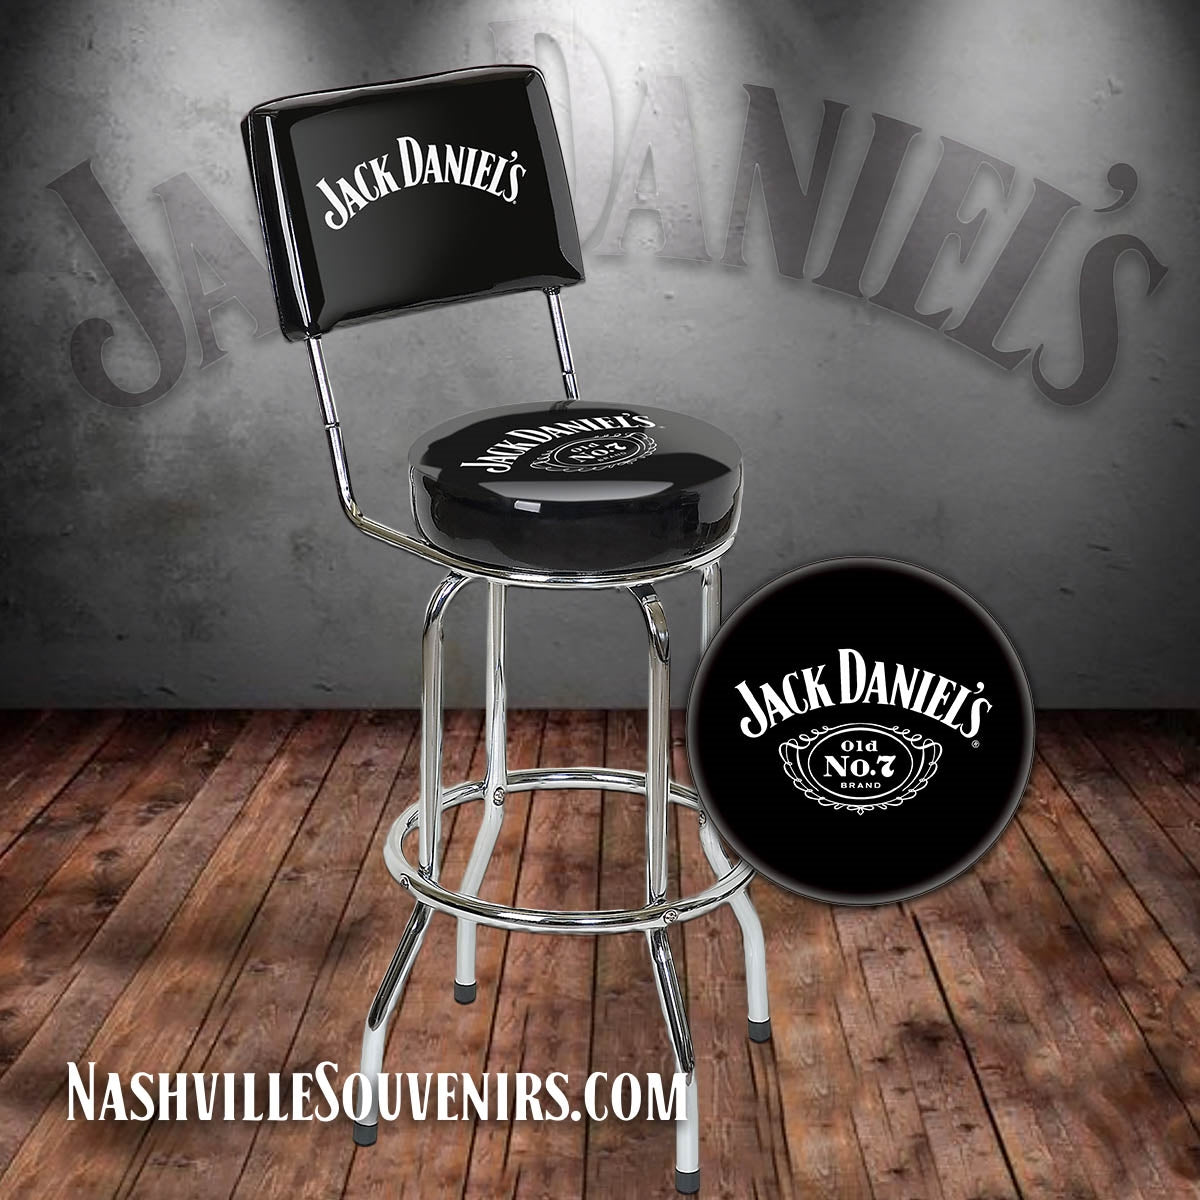 Hop on this this Jack Daniels Swivel Bar Stool with Backrest and enjoy your Jack Daniel's Tennessee whiskey. Look no farther for great man cave ideas than this classy Jack Daniel's bar stool and it SHIPS FREE within the continental U.S.!